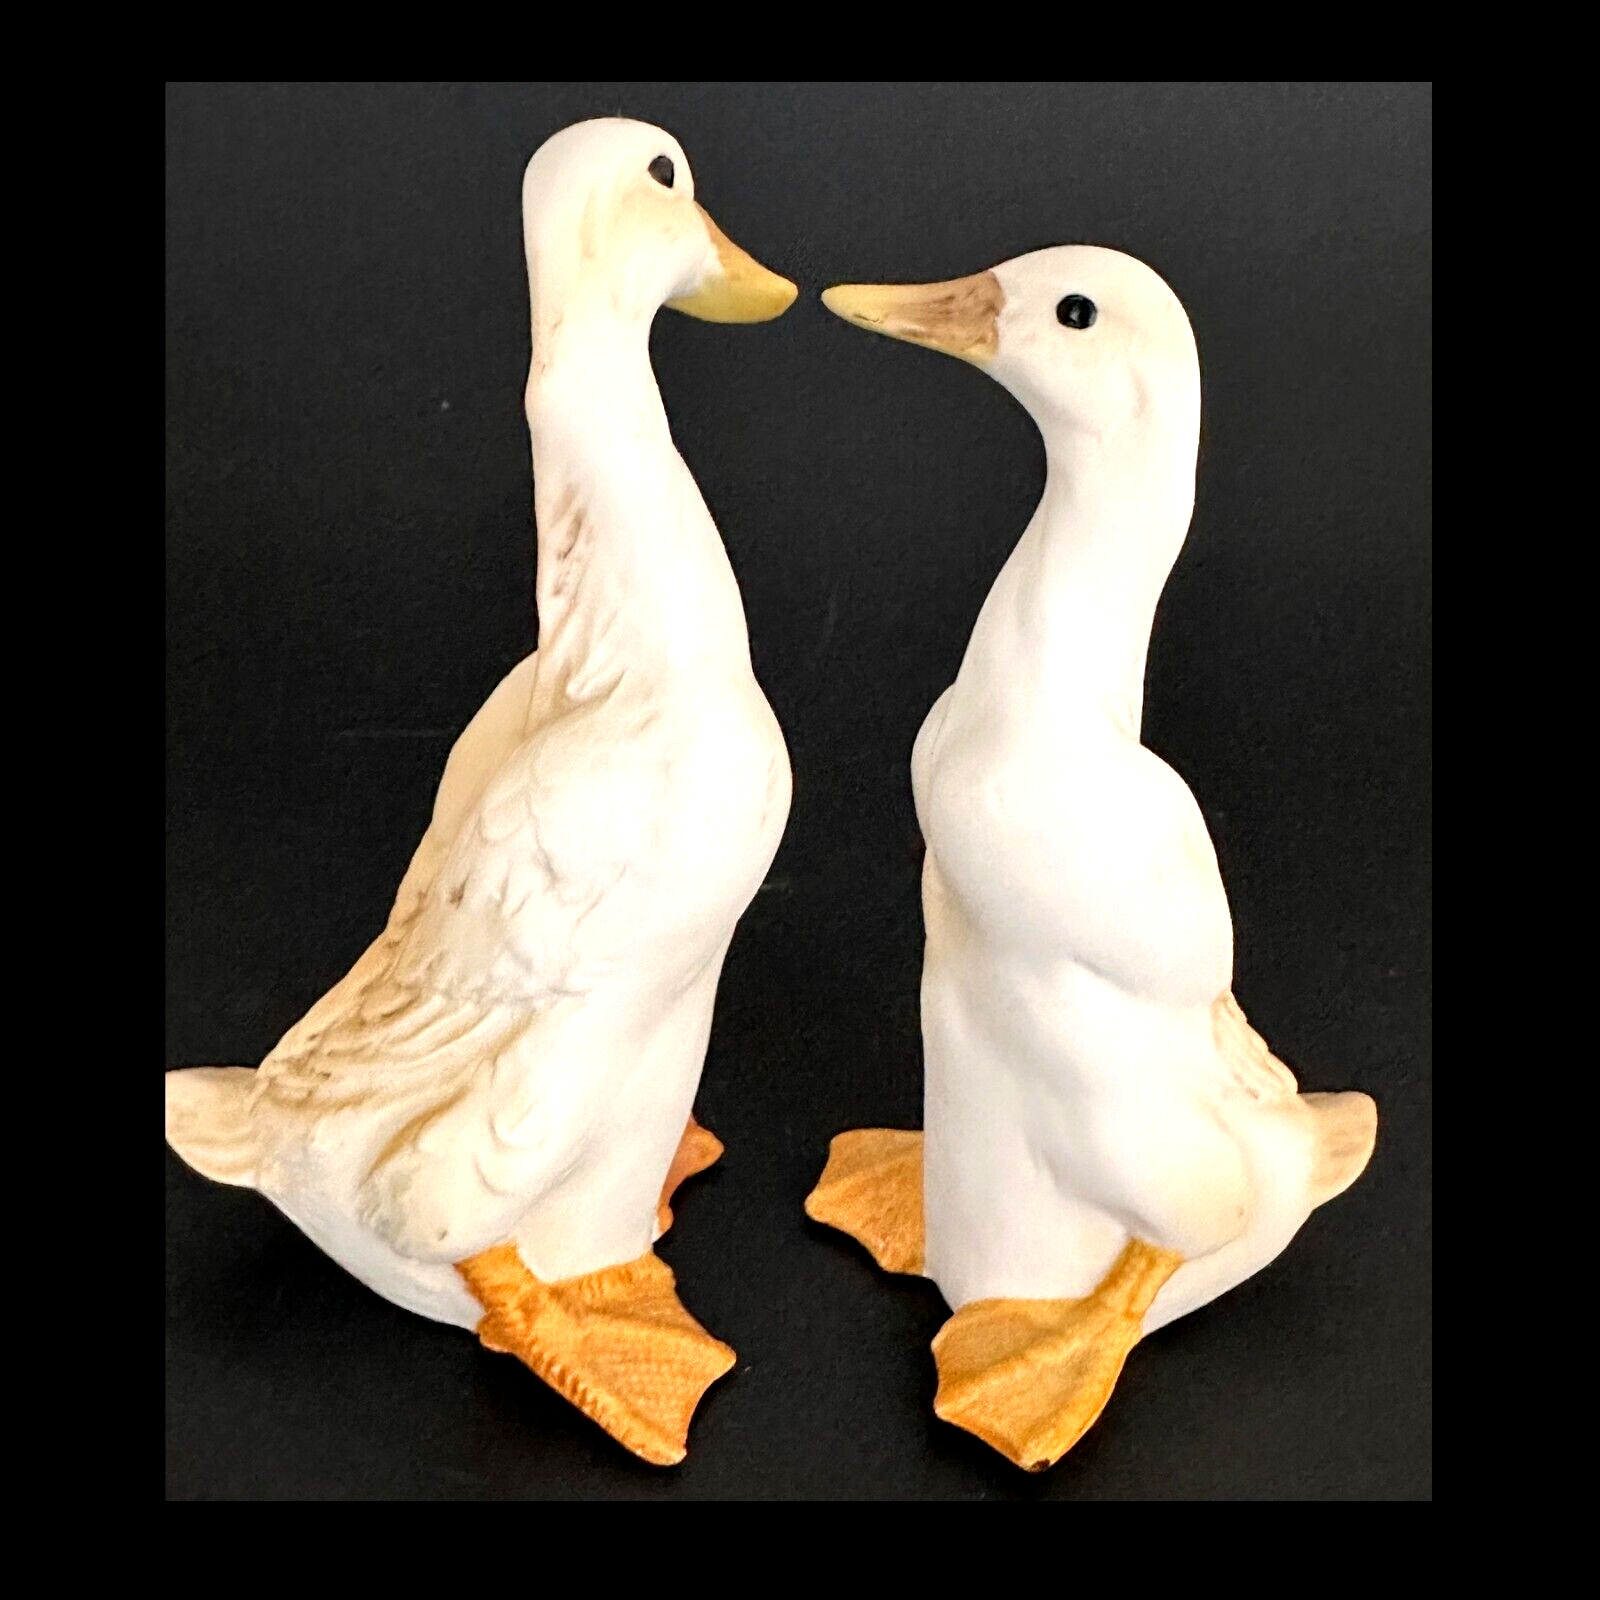 Two Geese Goose Porcelain Figurines Meico Inc. Marked Republic of China Pre 1949